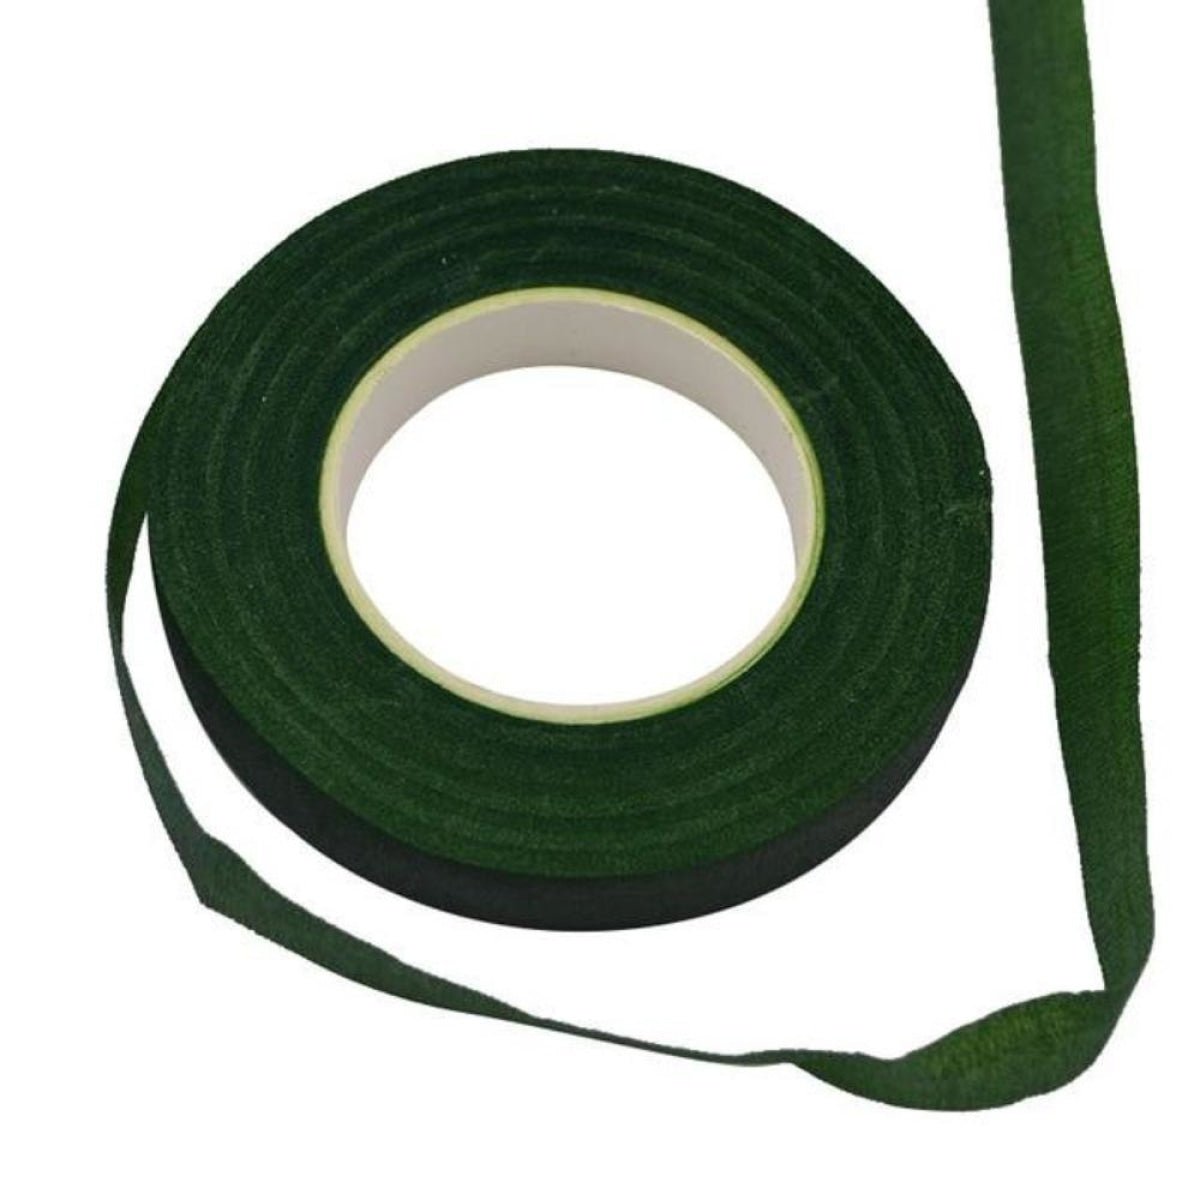 30m 12mm Bouquet Floral Stem Stretchy Tape Flower Stamen Wrapping Florist Green - Dark Green - - Asia Sell